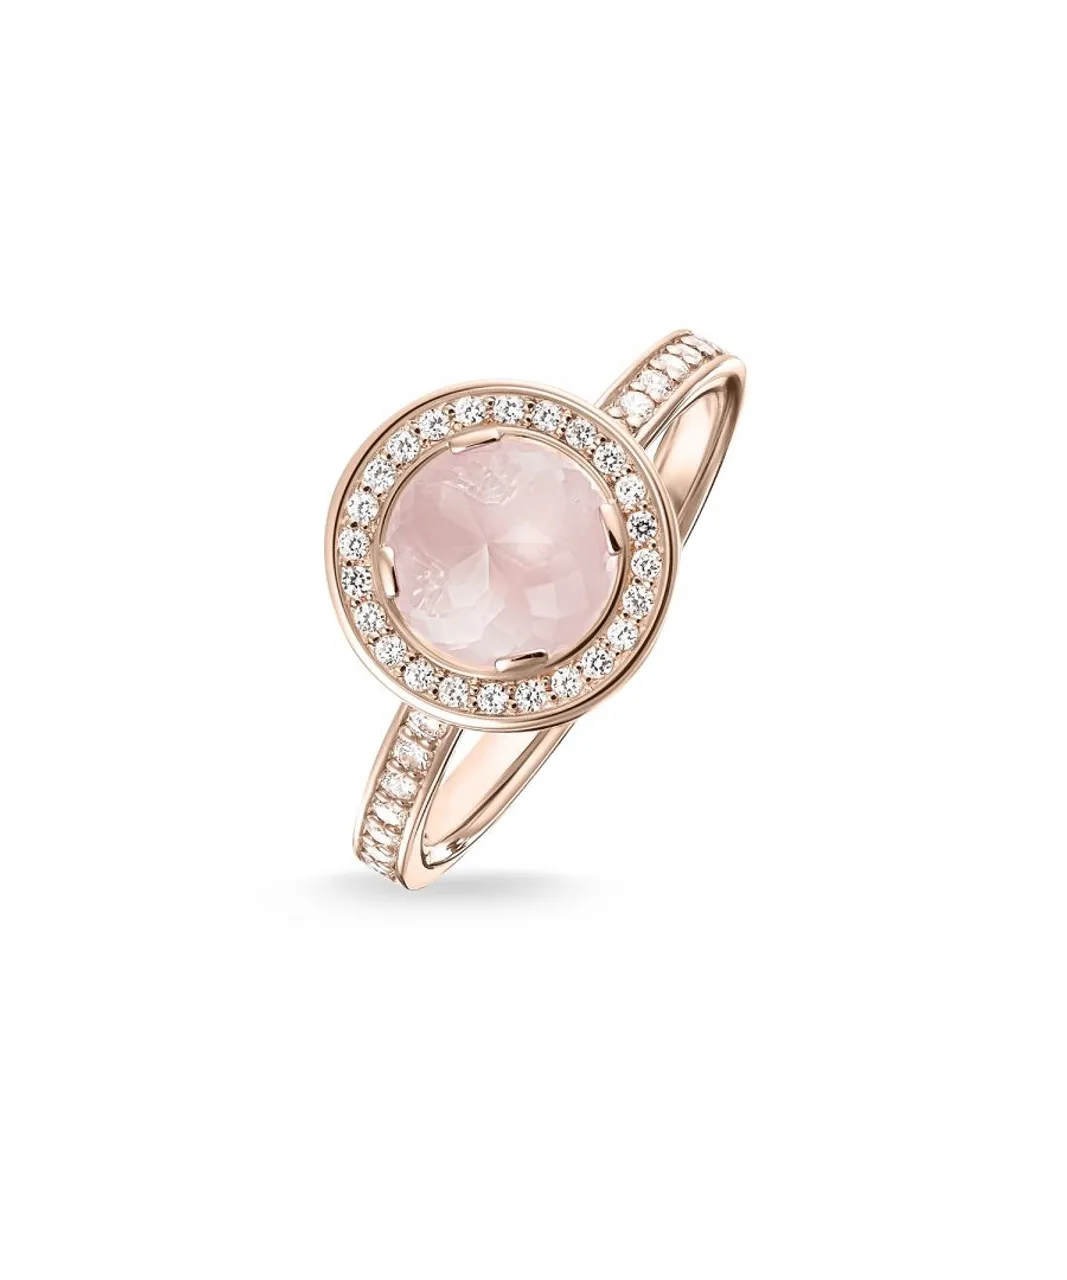 Thomas Sabo Womens Unisex Solitaire Ring Light Of Luna Pink - Rose Gold - Size I